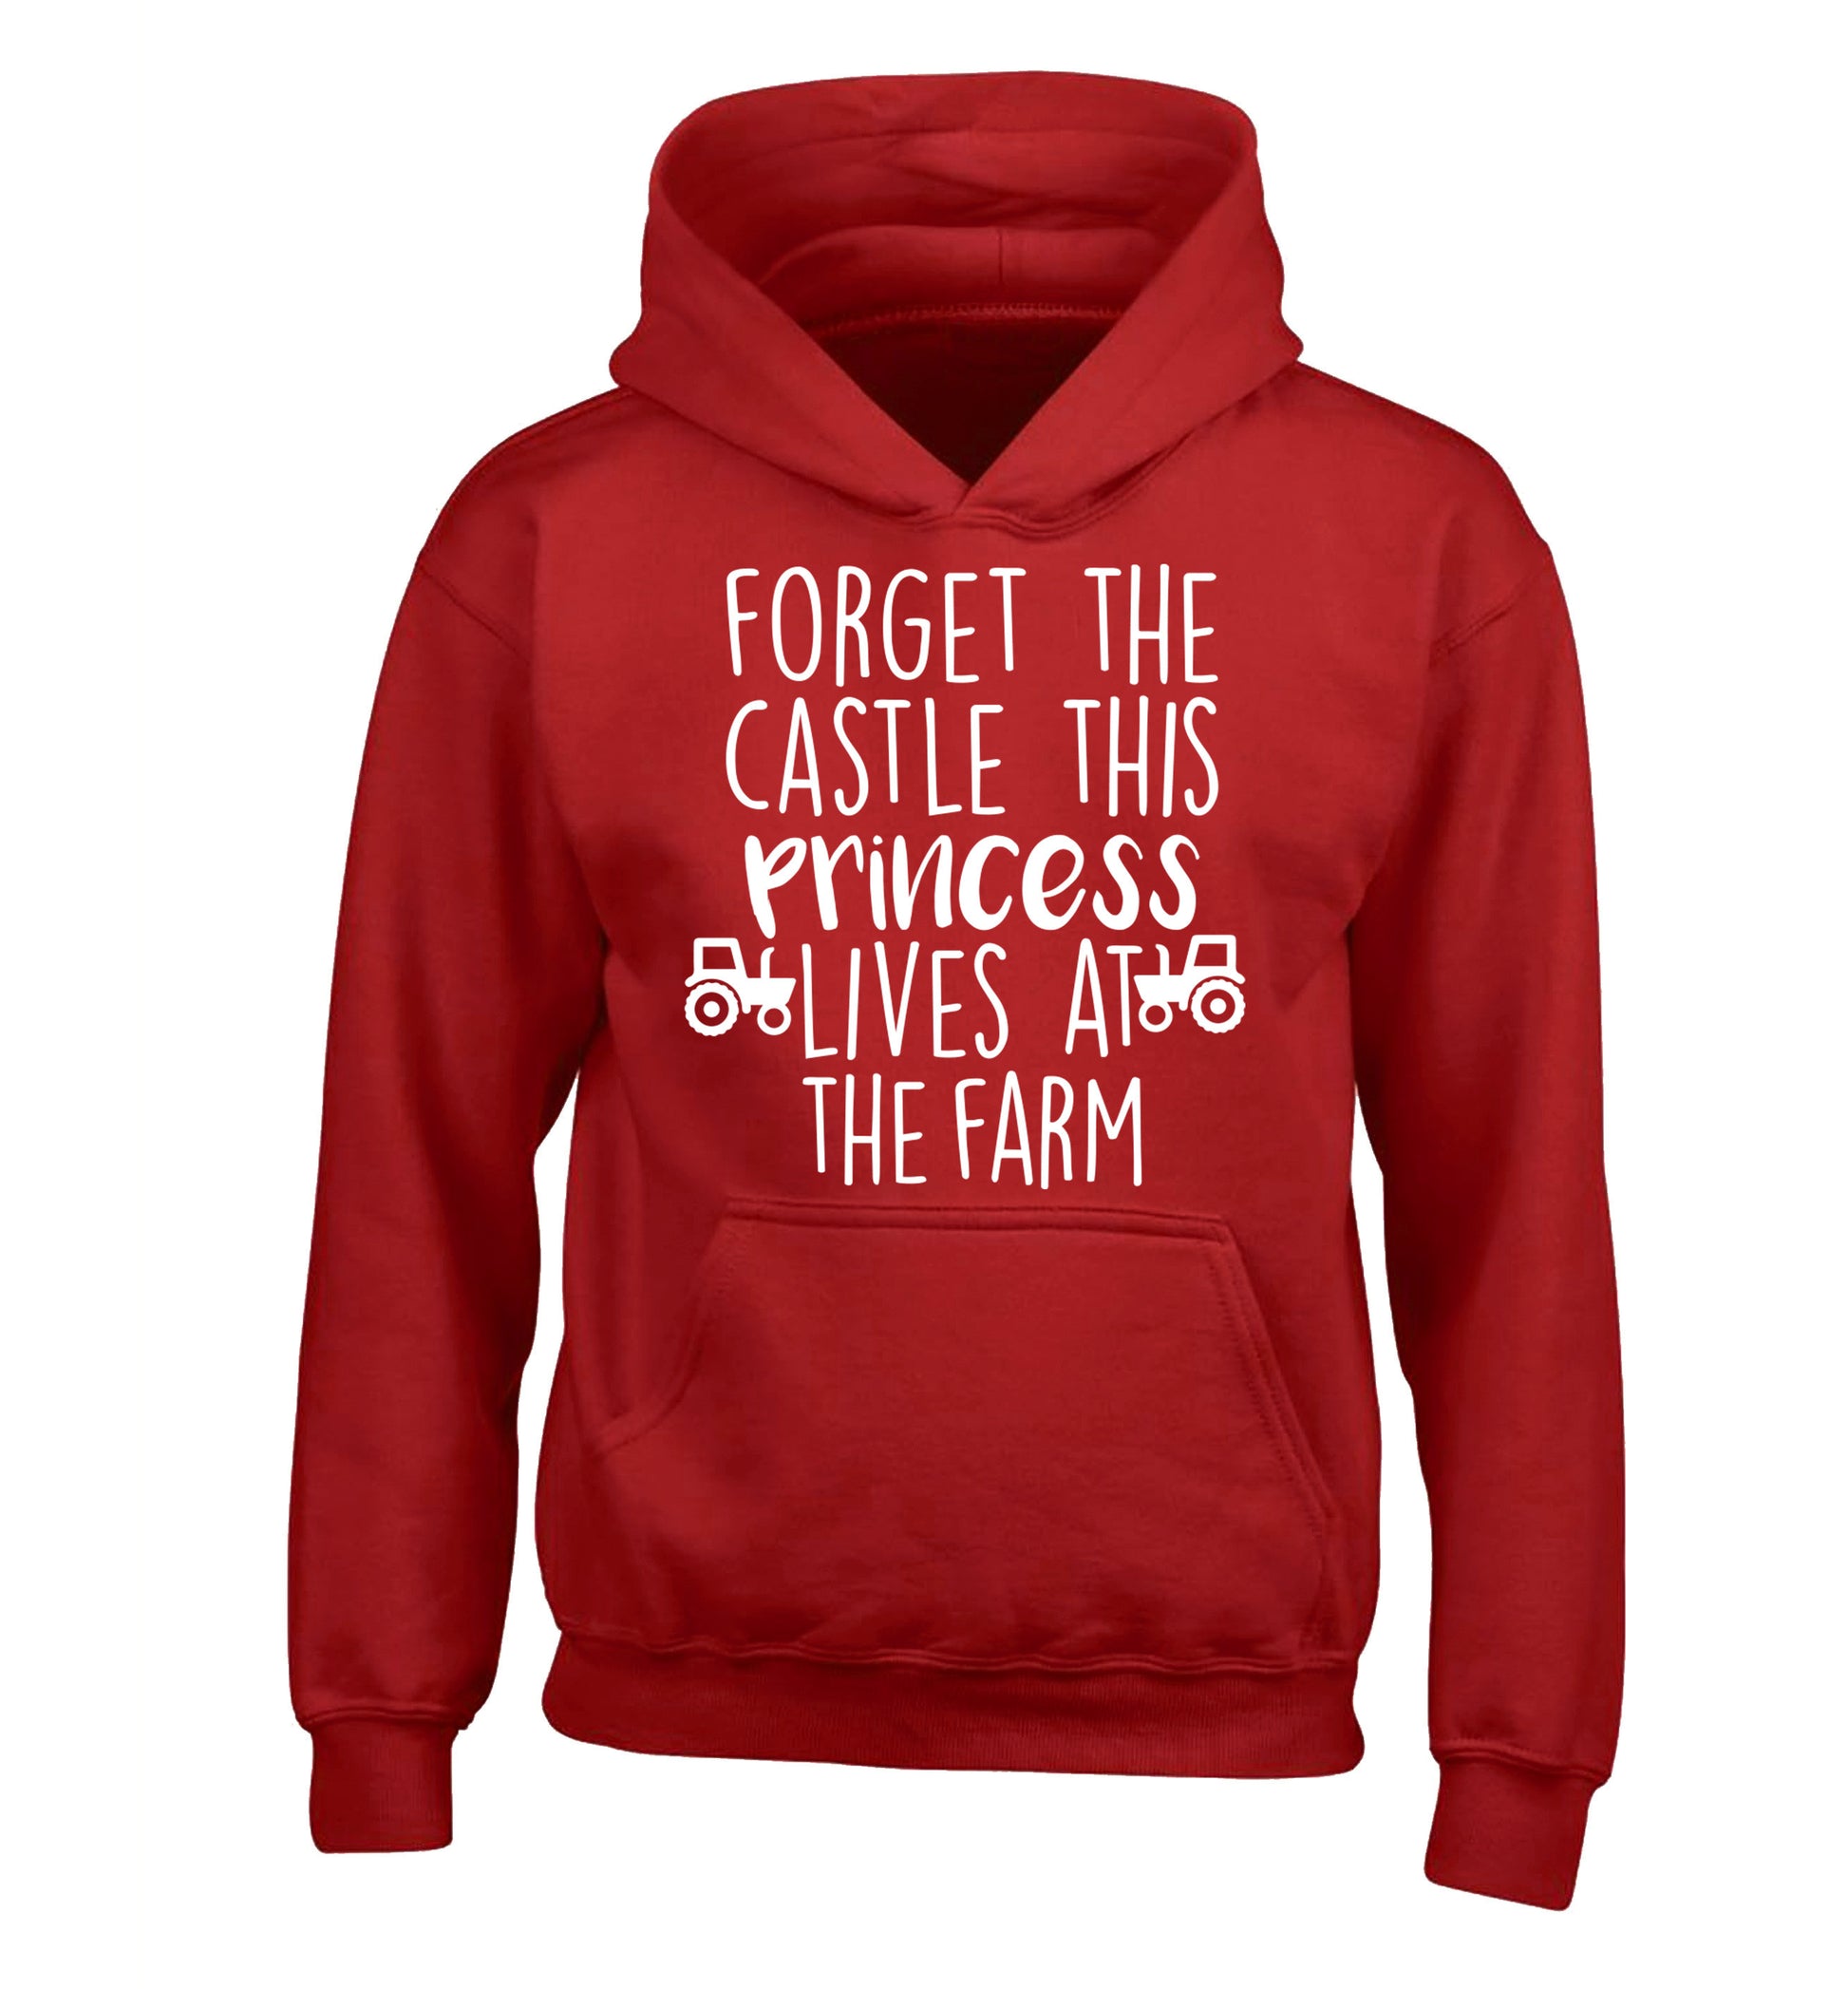 Forget the castle this princess lives at the farm children's red hoodie 12-14 Years